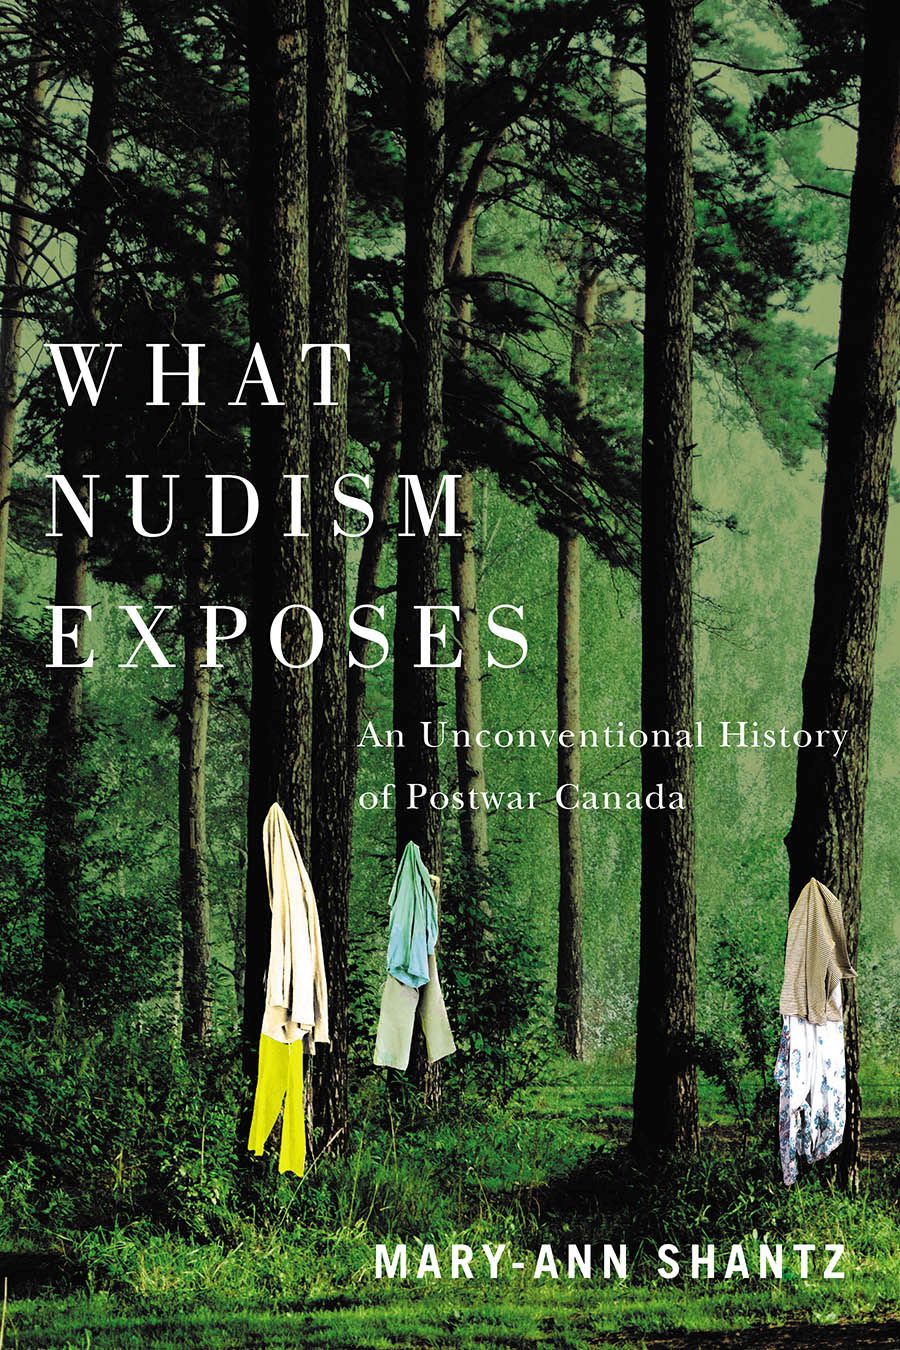 Image Search Nudist 7ru - What Nudism Exposes: An Unconventional History of Postwar Canada, Shantz